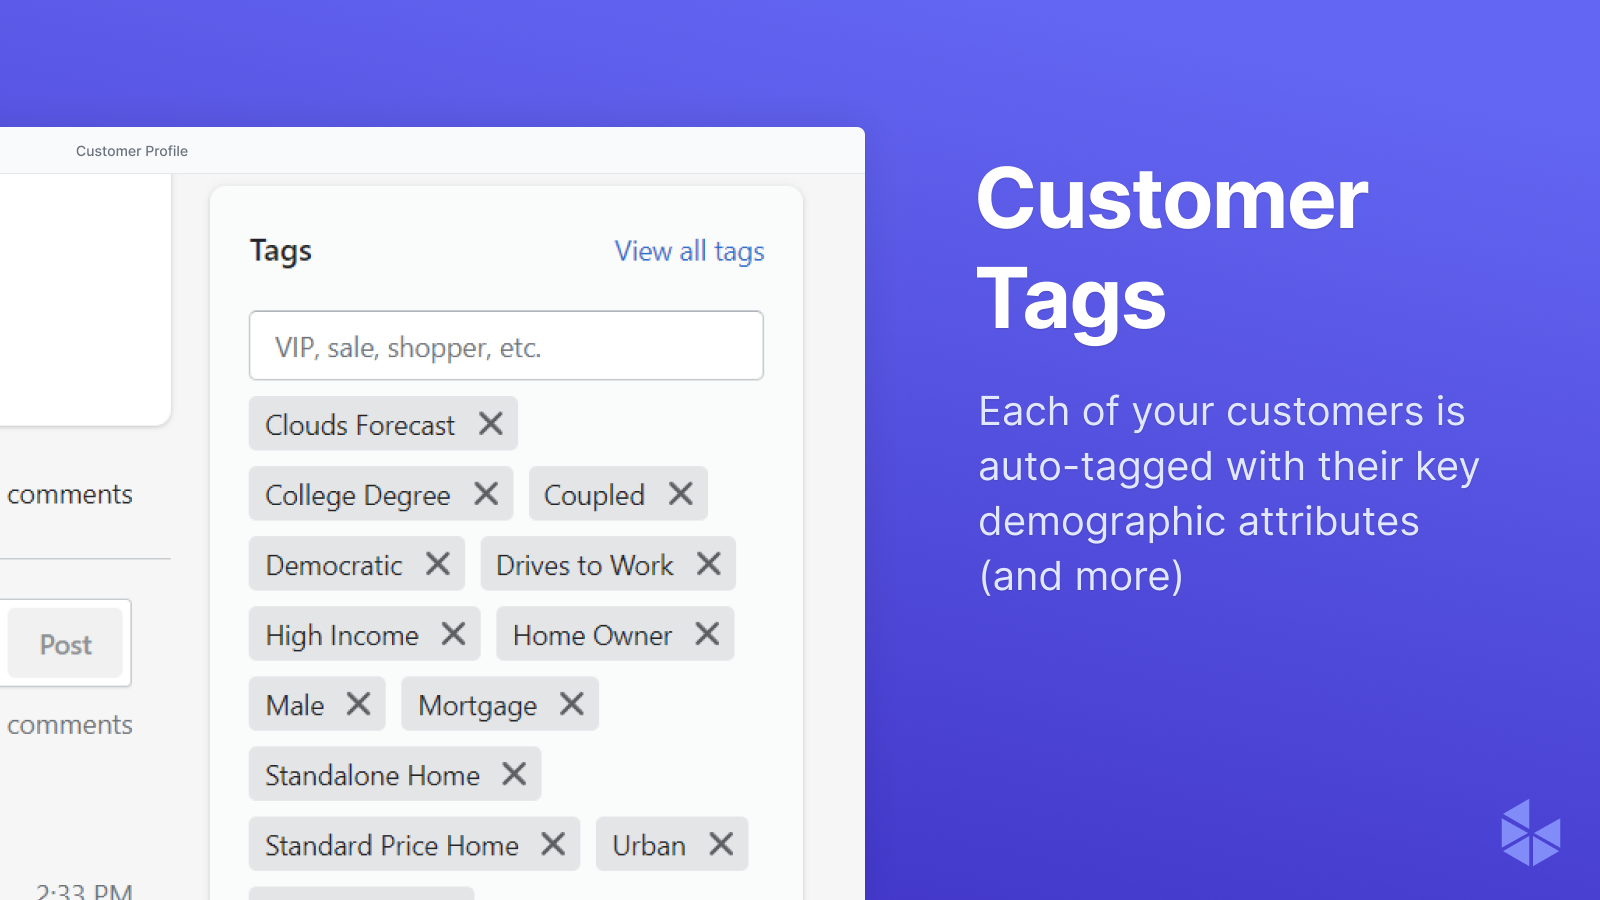 Auto-tag your customers with important demographic attributes